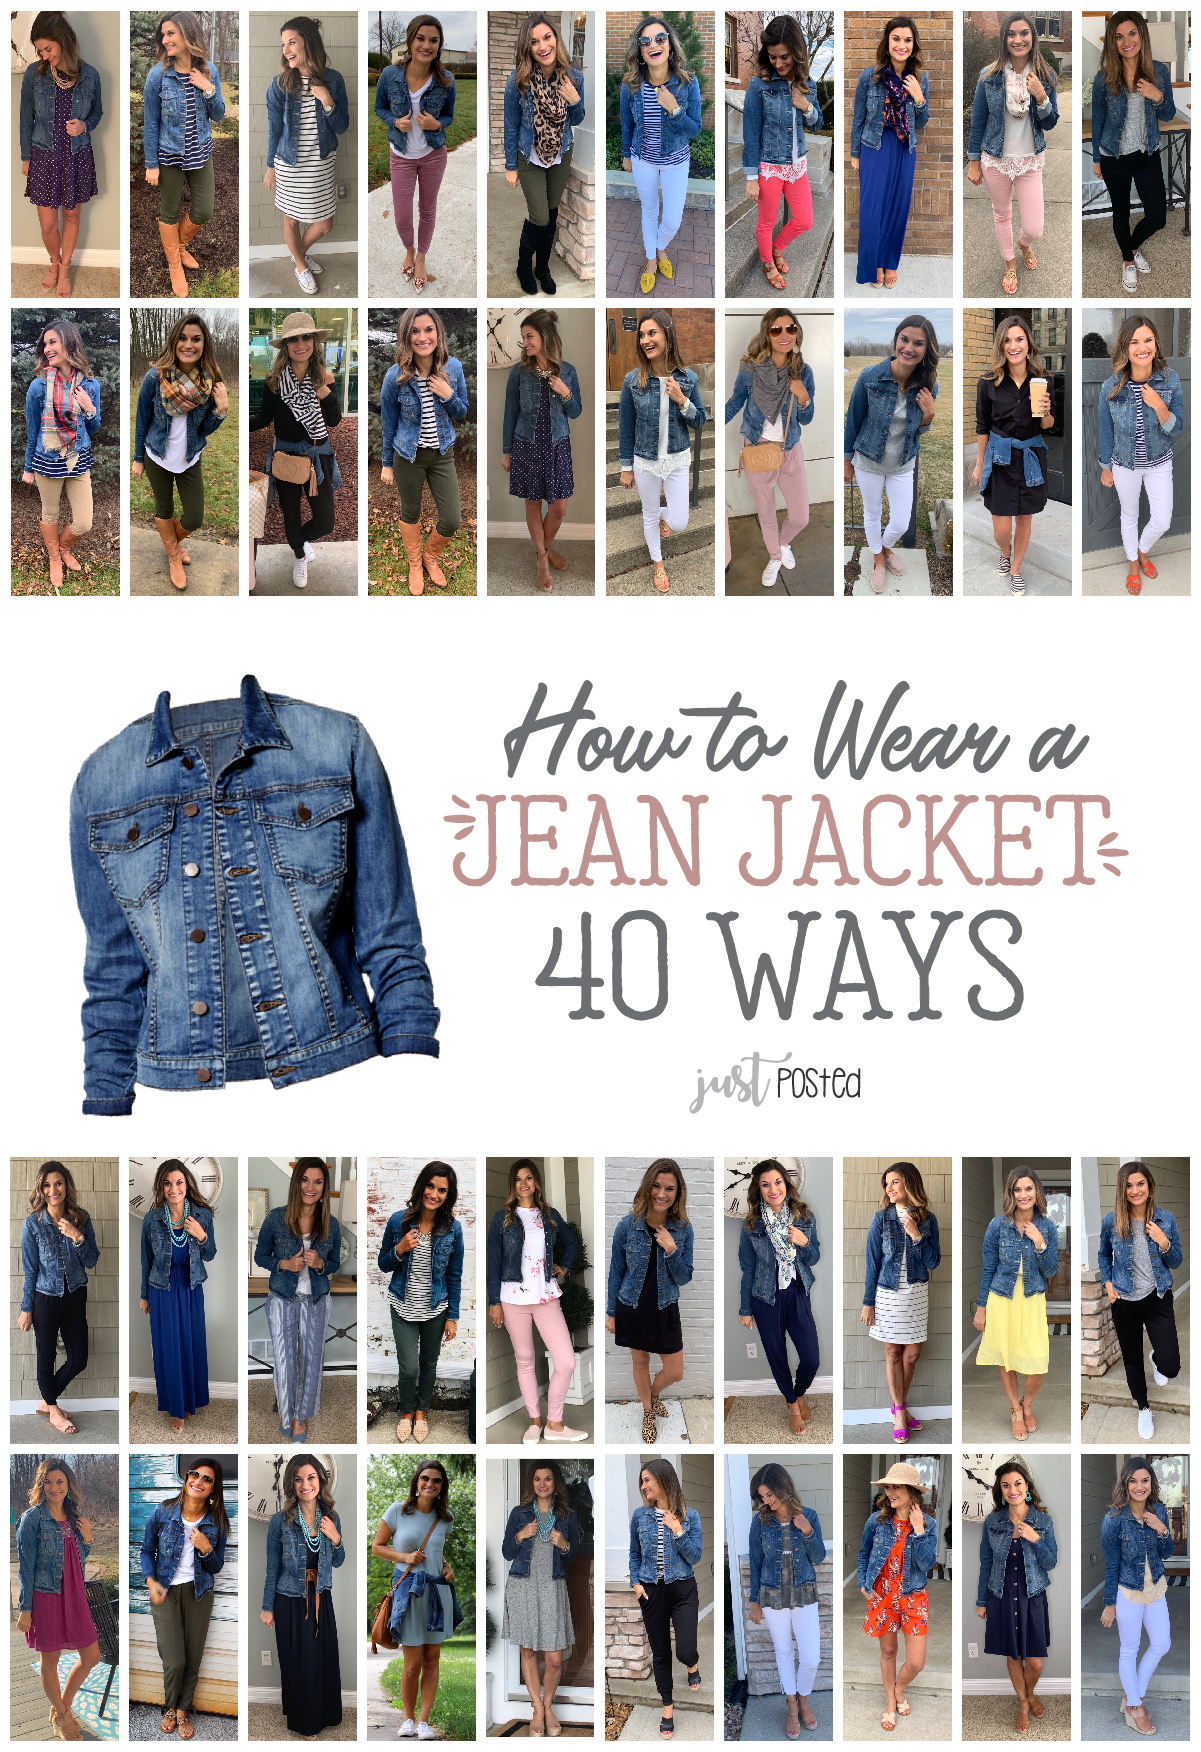 How To Wear 1 Jean Jacket 40 Ways Just Posted 